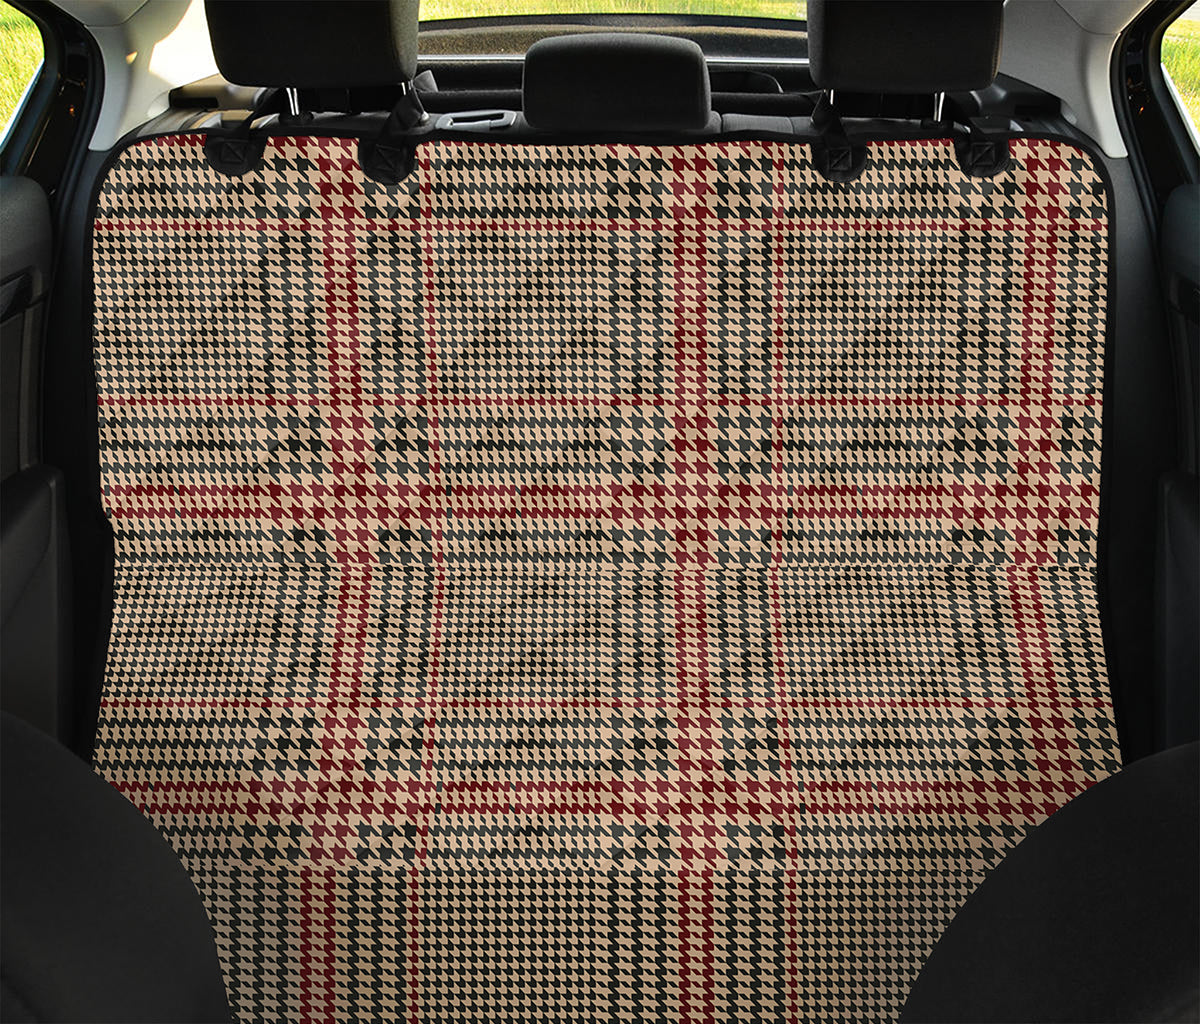 Brown Beige And Red Glen Plaid Print Pet Car Back Seat Cover